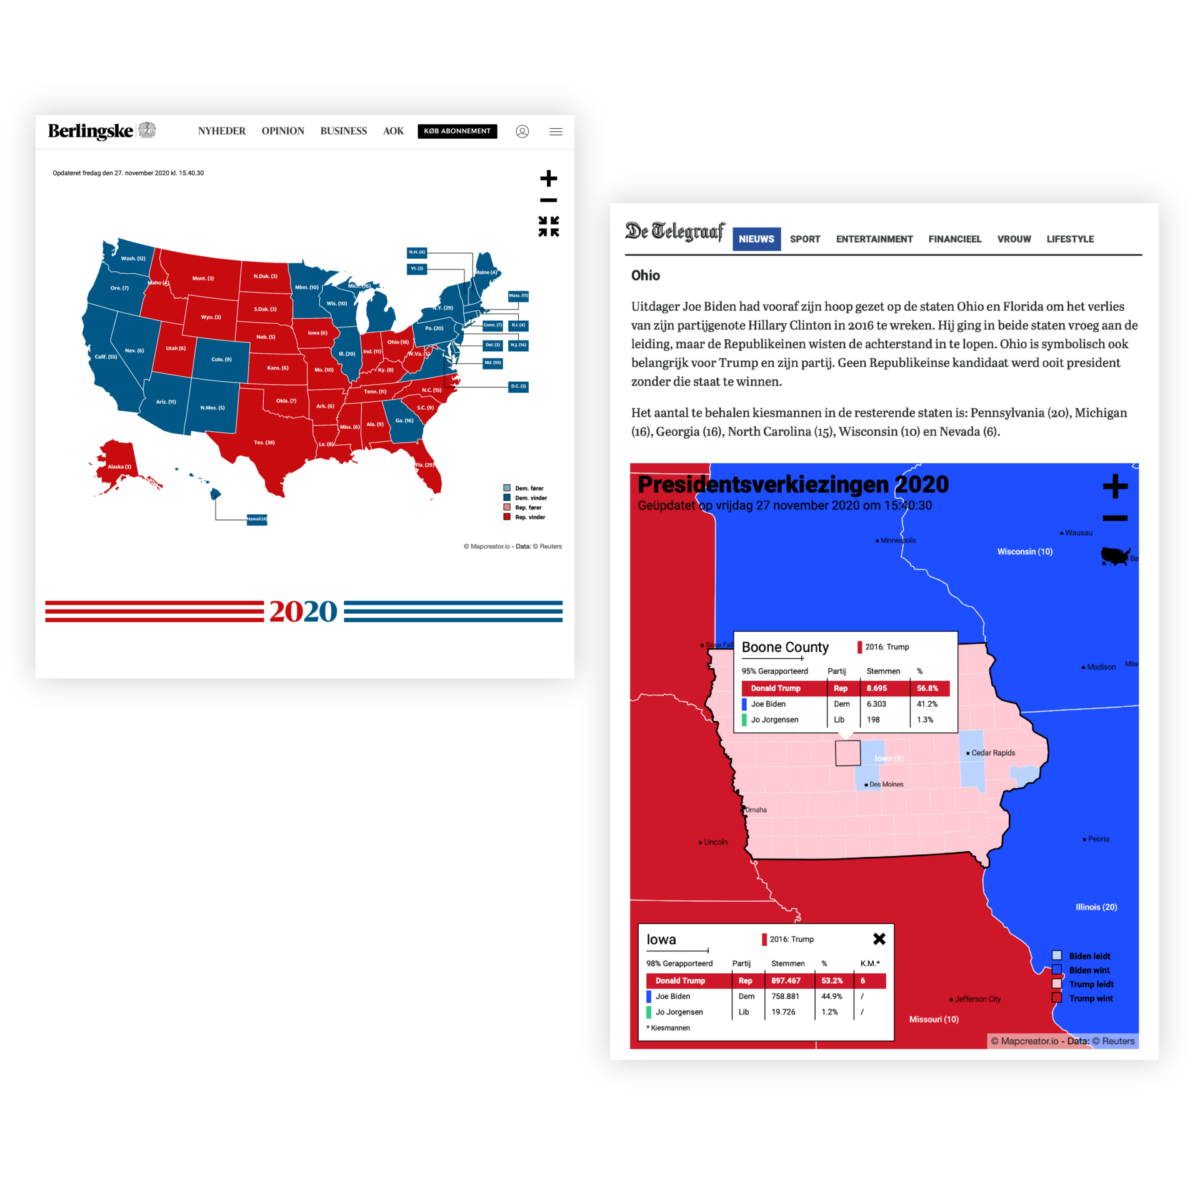 Example of articles that use electoral maps